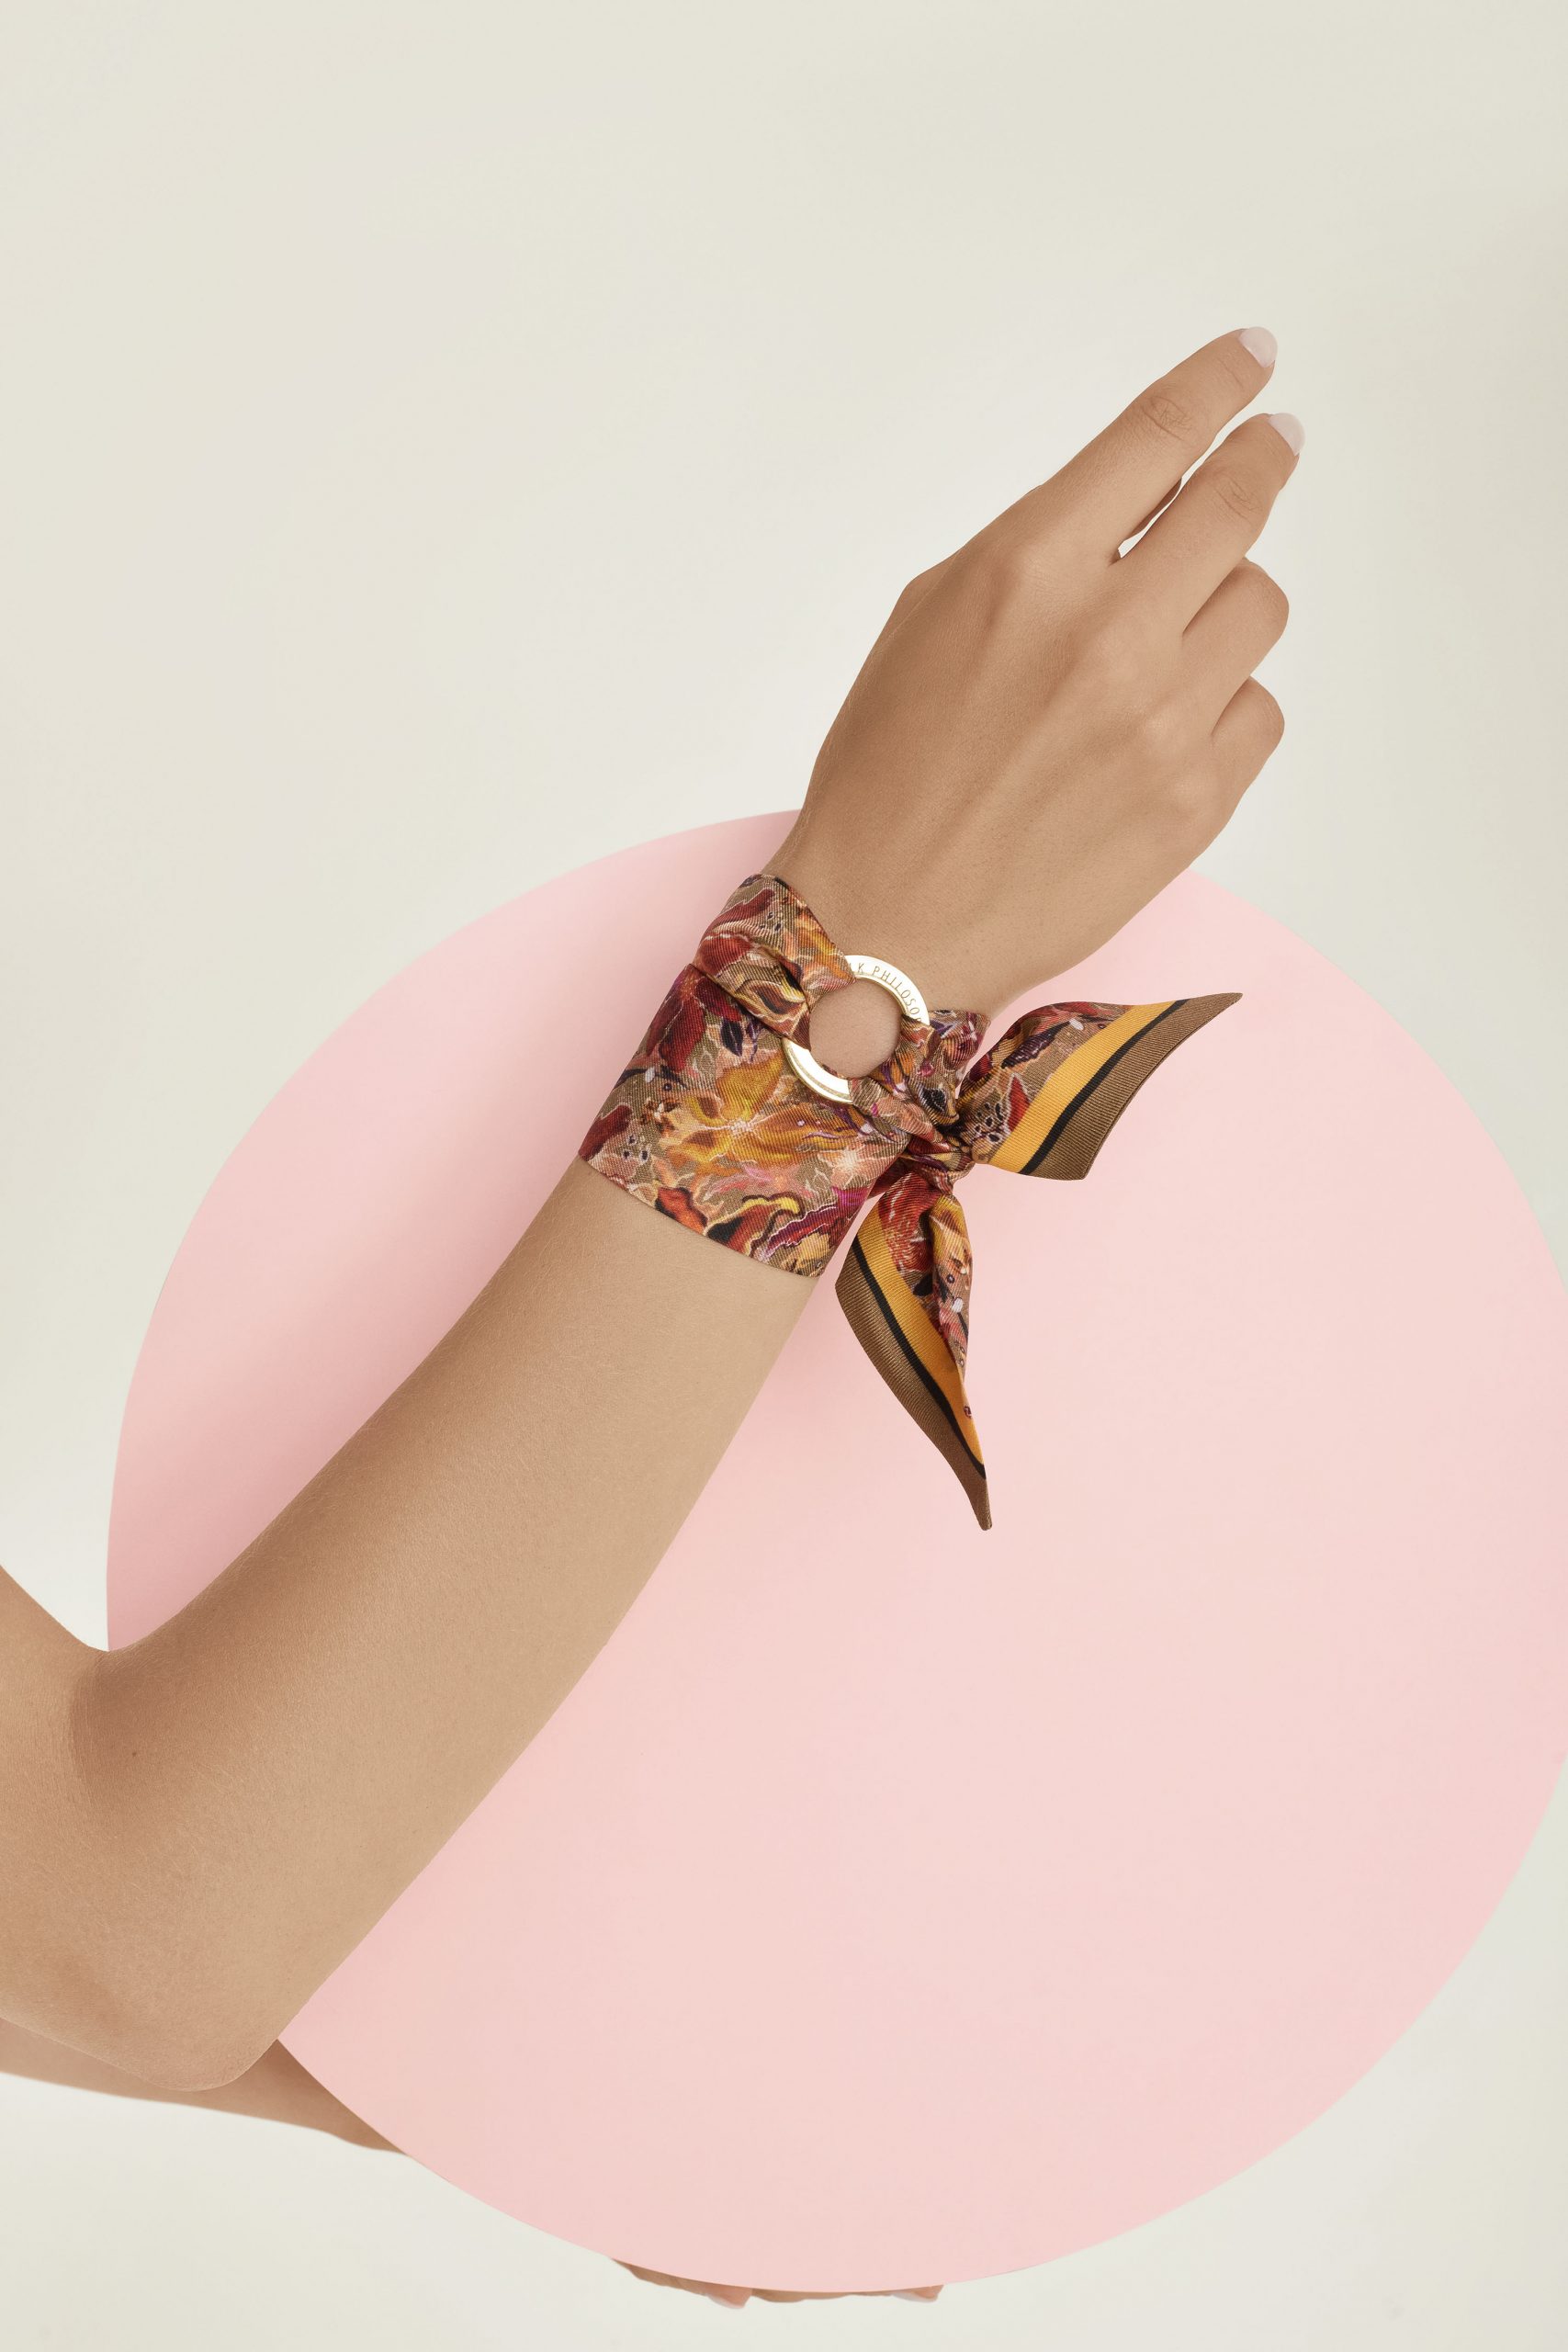 Hermes Twilly And Scarf Ring As A Bracelet 